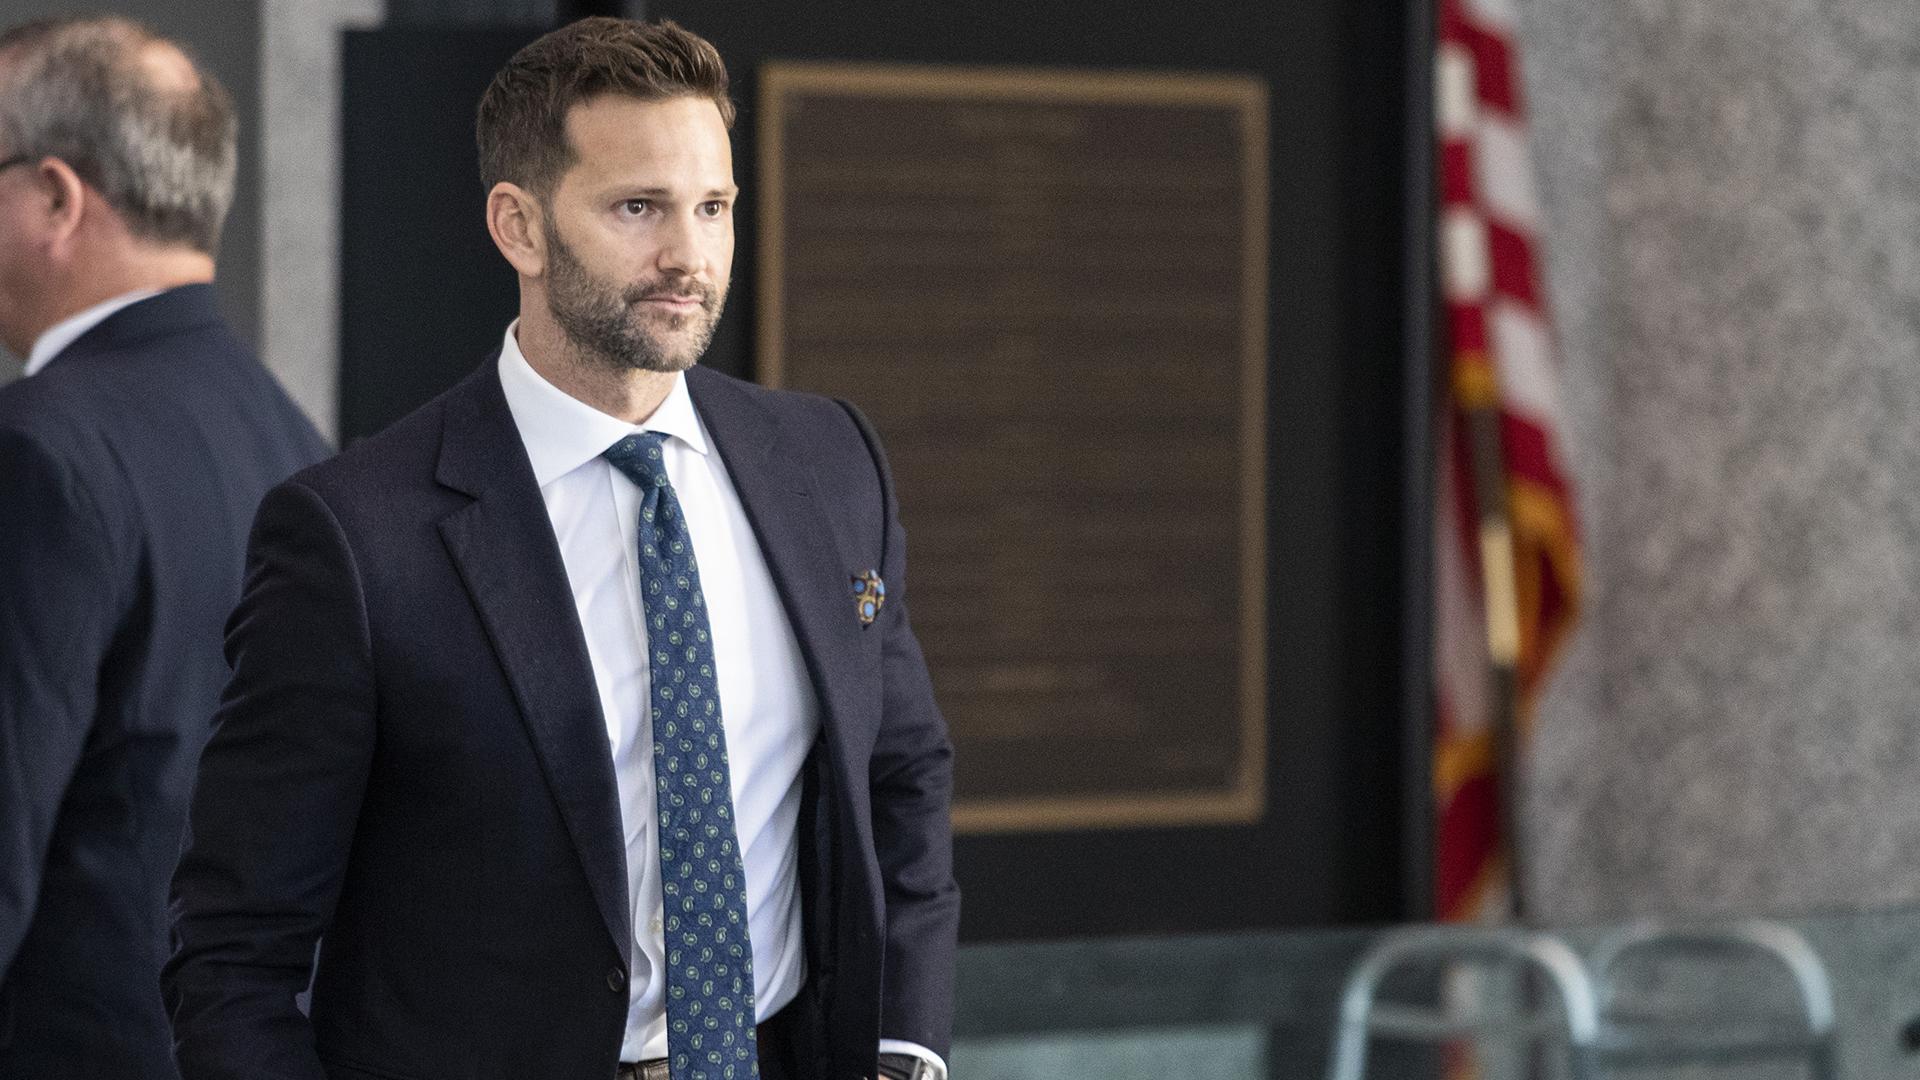 Former U.S. Rep. Aaron Schock walks into the Dirksen Federal Courthouse on Wednesday, March 6, 2019. Schock was scheduled to appear in court for the first time since the U.S. Supreme Court declined to get involved in his corruption case. (Ashlee Rezin / Chicago Sun-Times via AP)